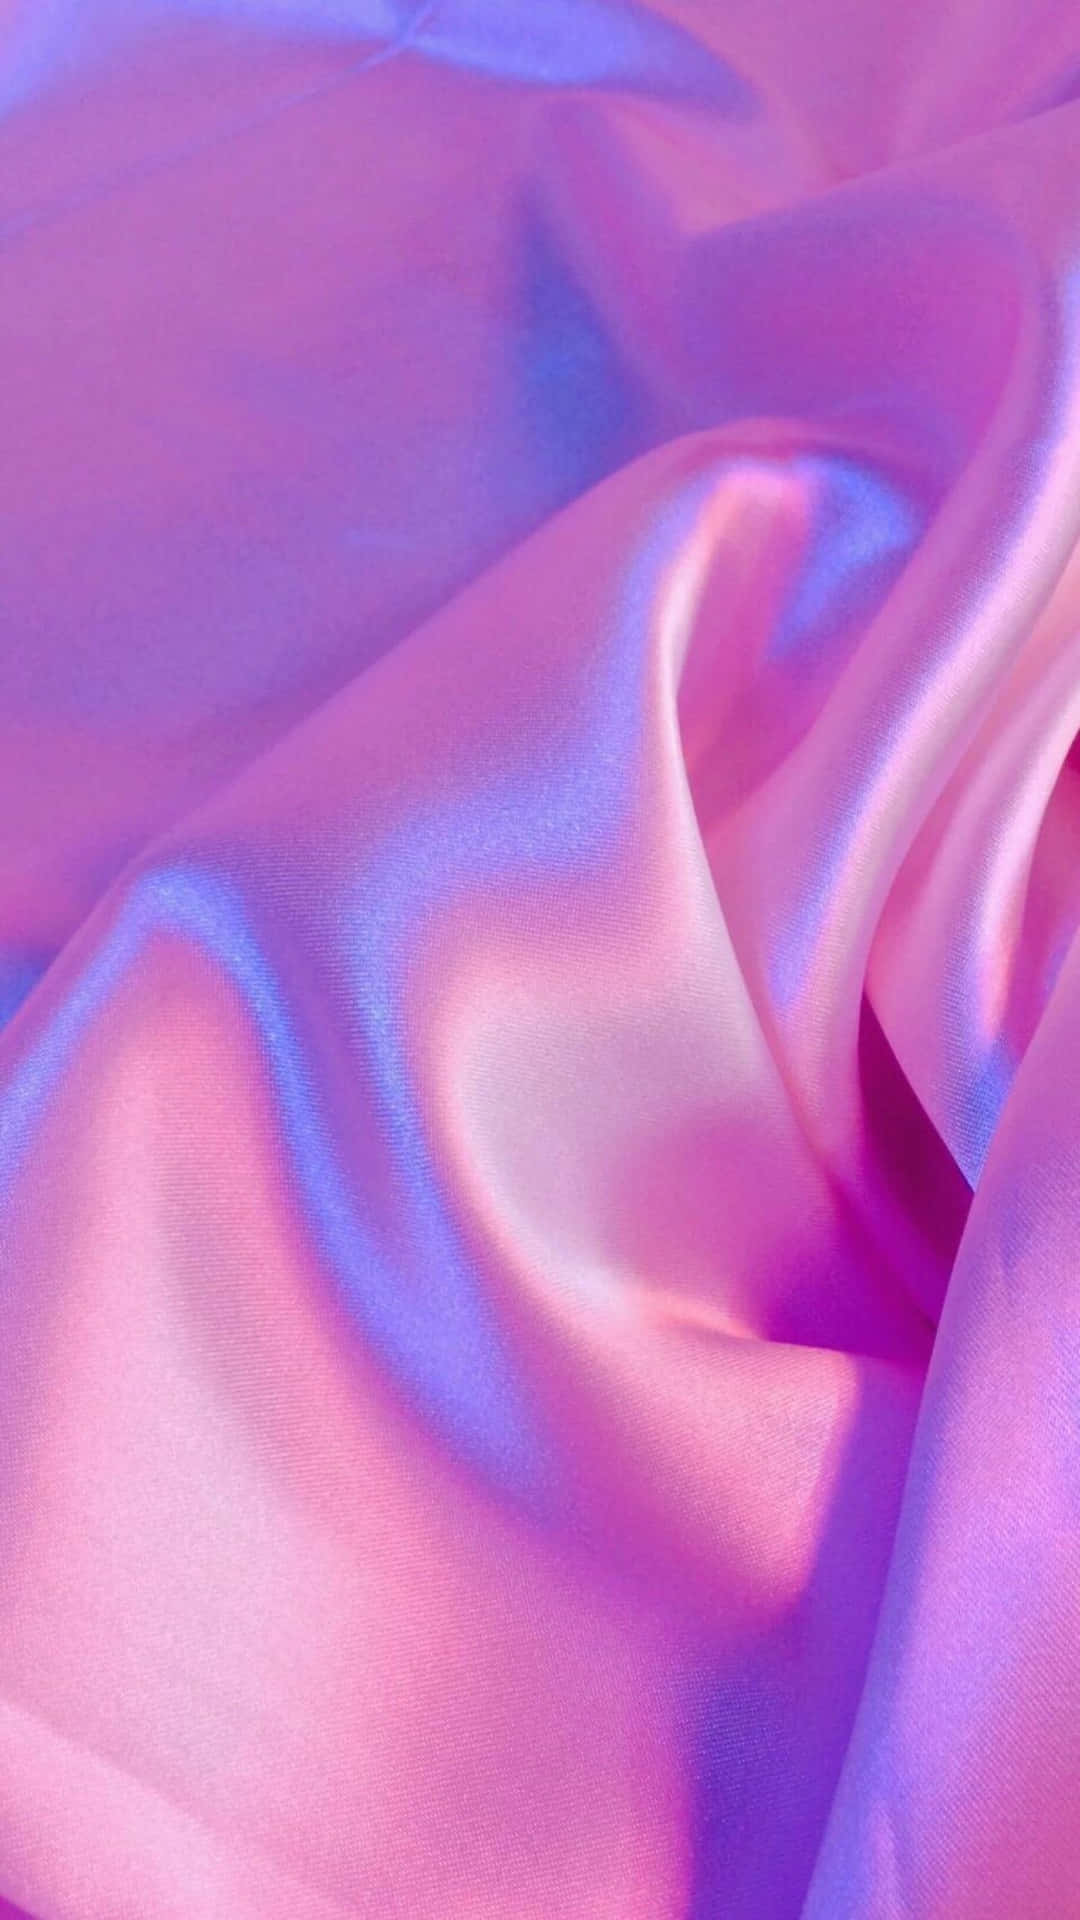 Download A Close Up Of A Pink And Blue Satin Fabric Wallpaper